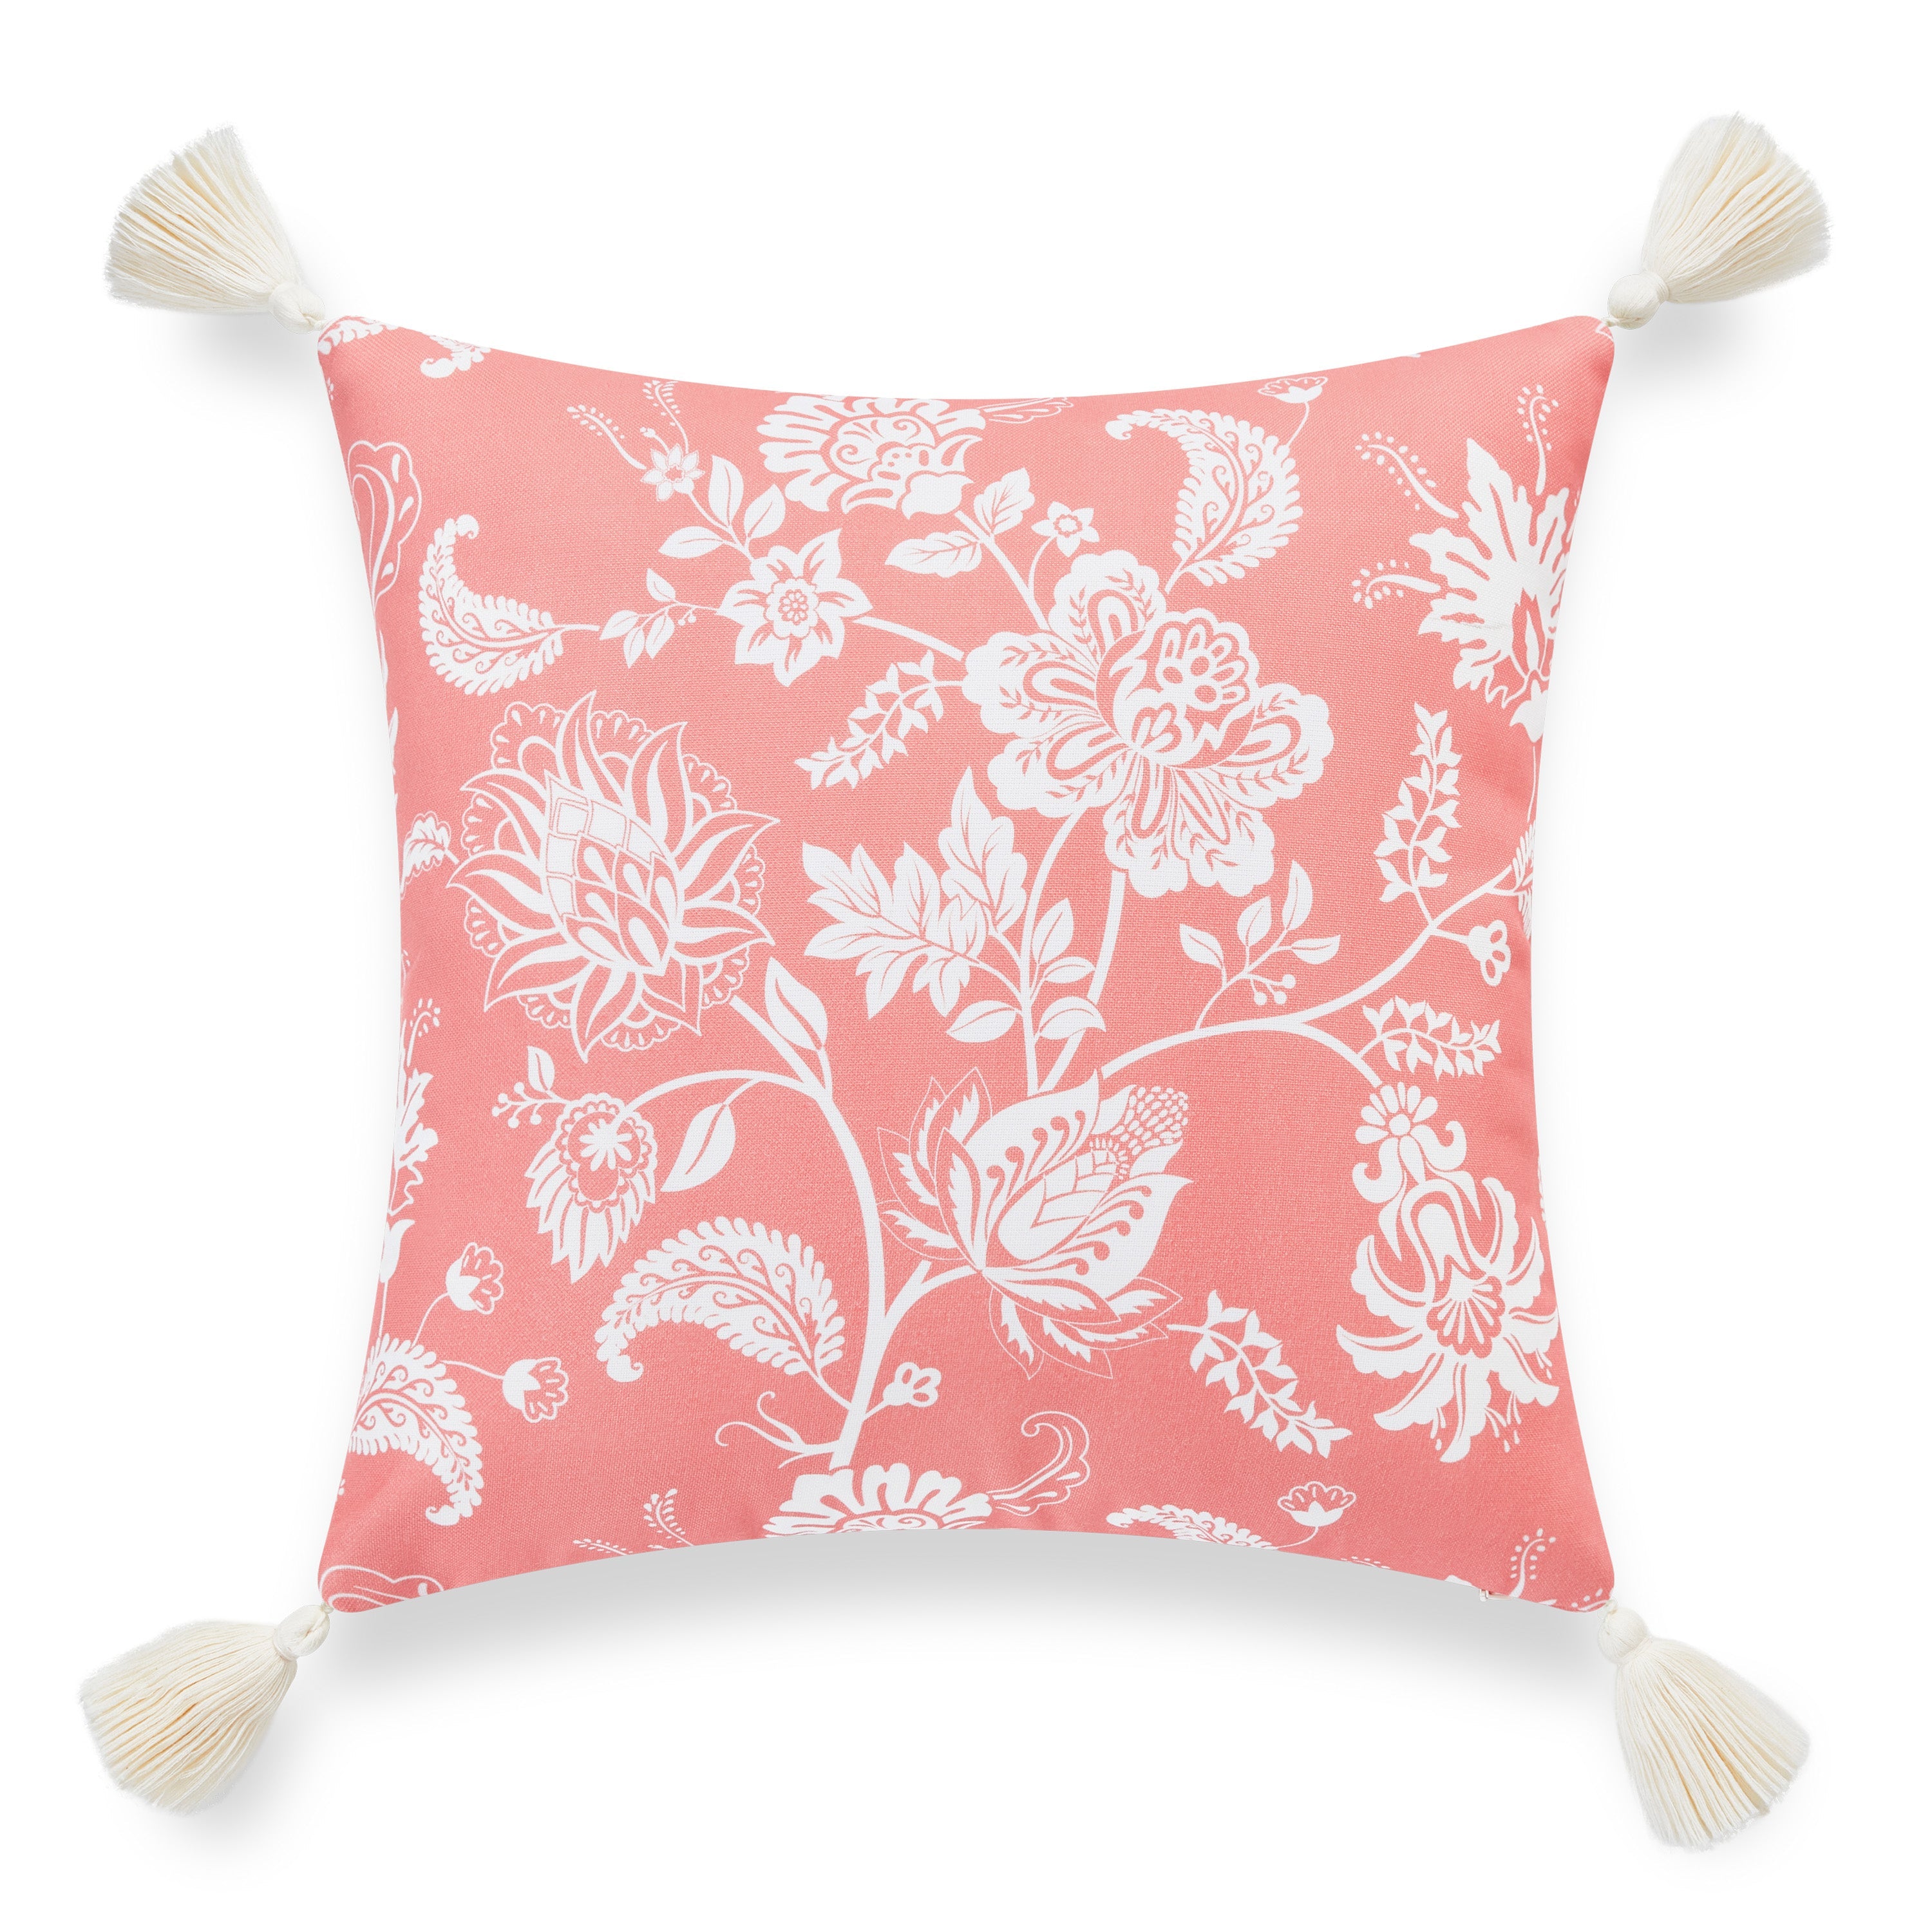 Coastal Indoor Outdoor Throw Pillow Cover, Floral Tassel, Coral Pink, 18"x18"